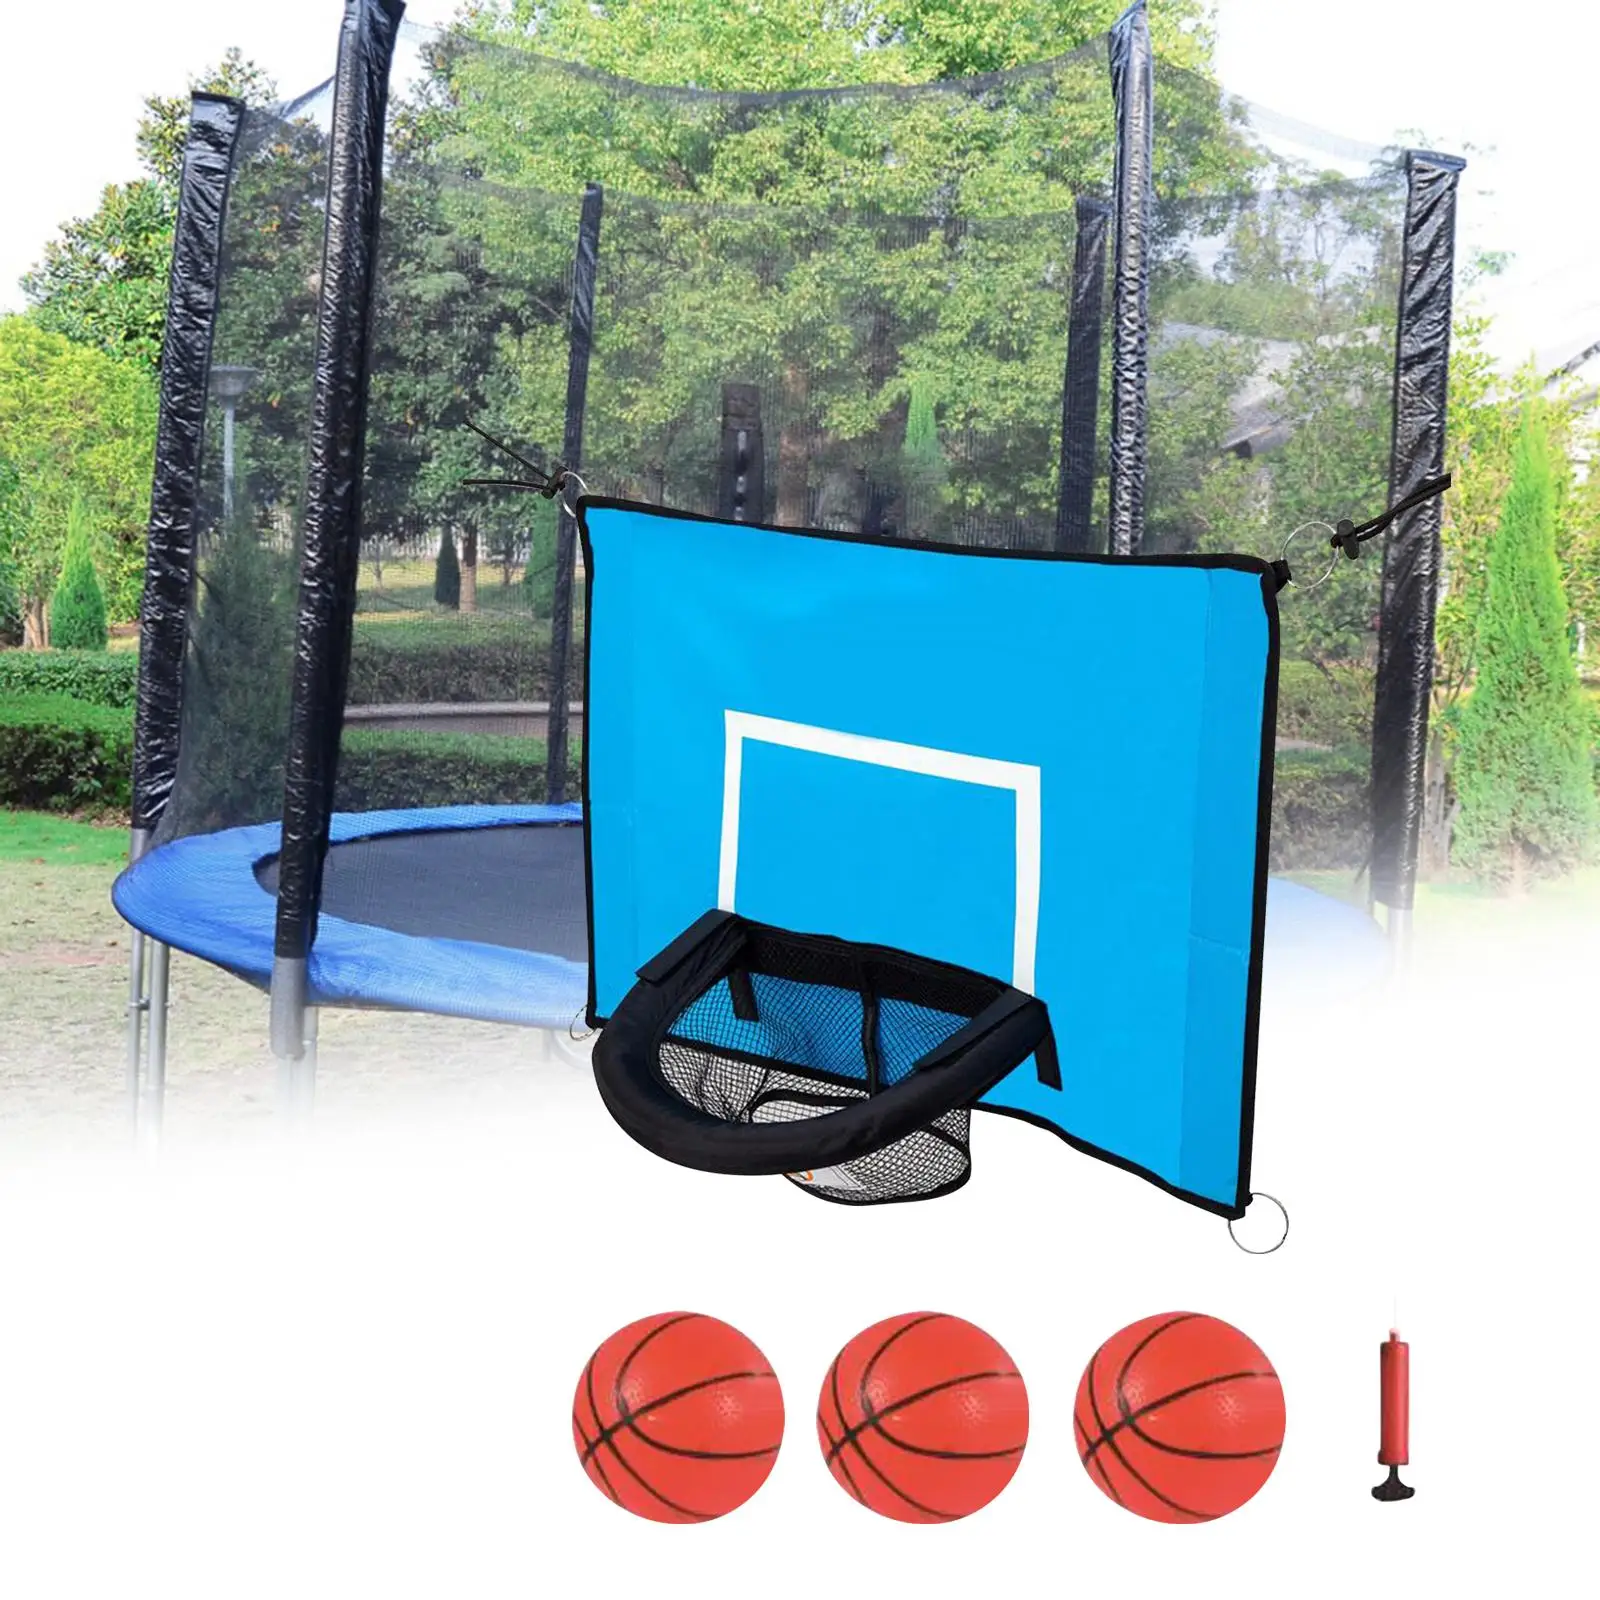 Trampolines Basketball Hoop Attachment with Pump and Mini Basketball Boys Girls Easy to Assemble for All Ages Toy Outdoor Sports